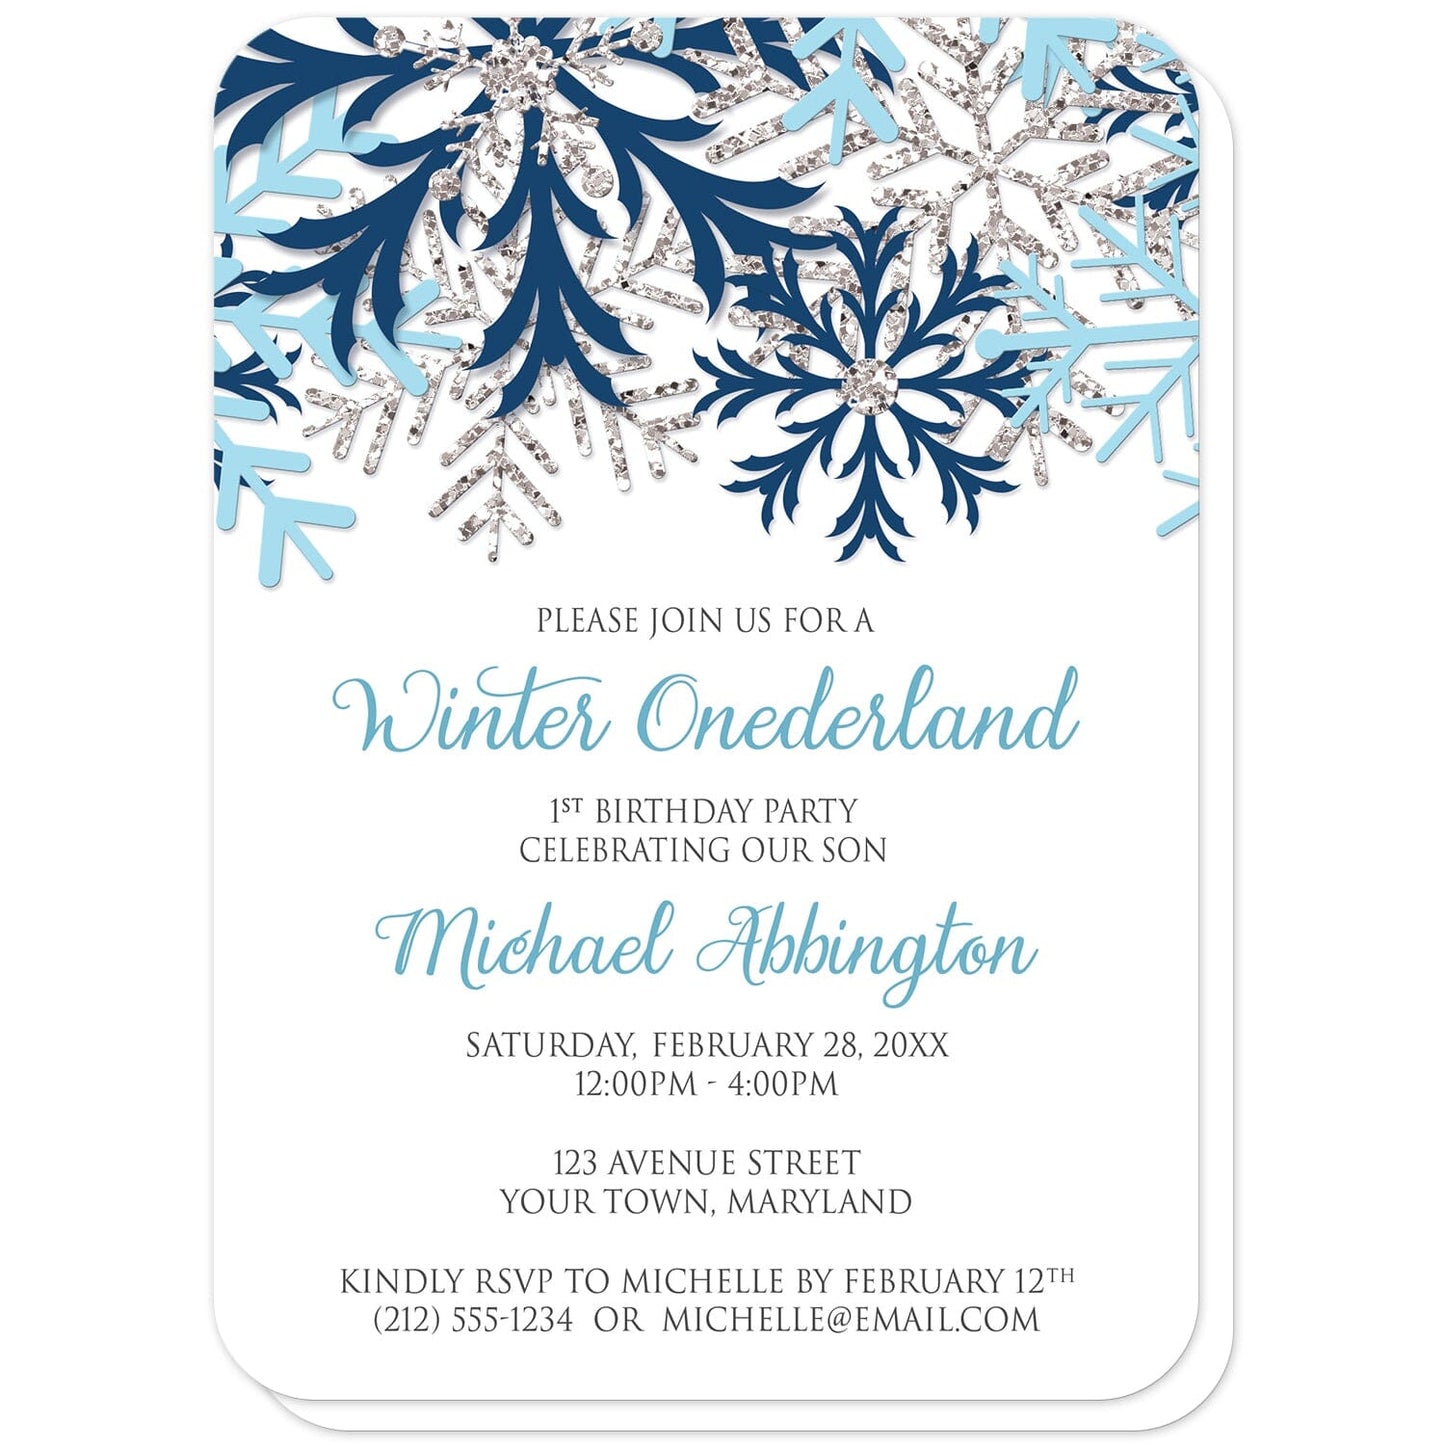 Blue Silver Snowflake 1st Birthday Winter Onederland Invitations (with rounded corners) at Artistically Invited. Pretty blue silver snowflake 1st birthday Winter Onederland invitations designed with navy blue, aqua blue, and silver-colored glitter-illustrated snowflakes along the top of the invitations. Your personalized 1st birthday party details are custom printed in blue and gray on white below the snowflakes.